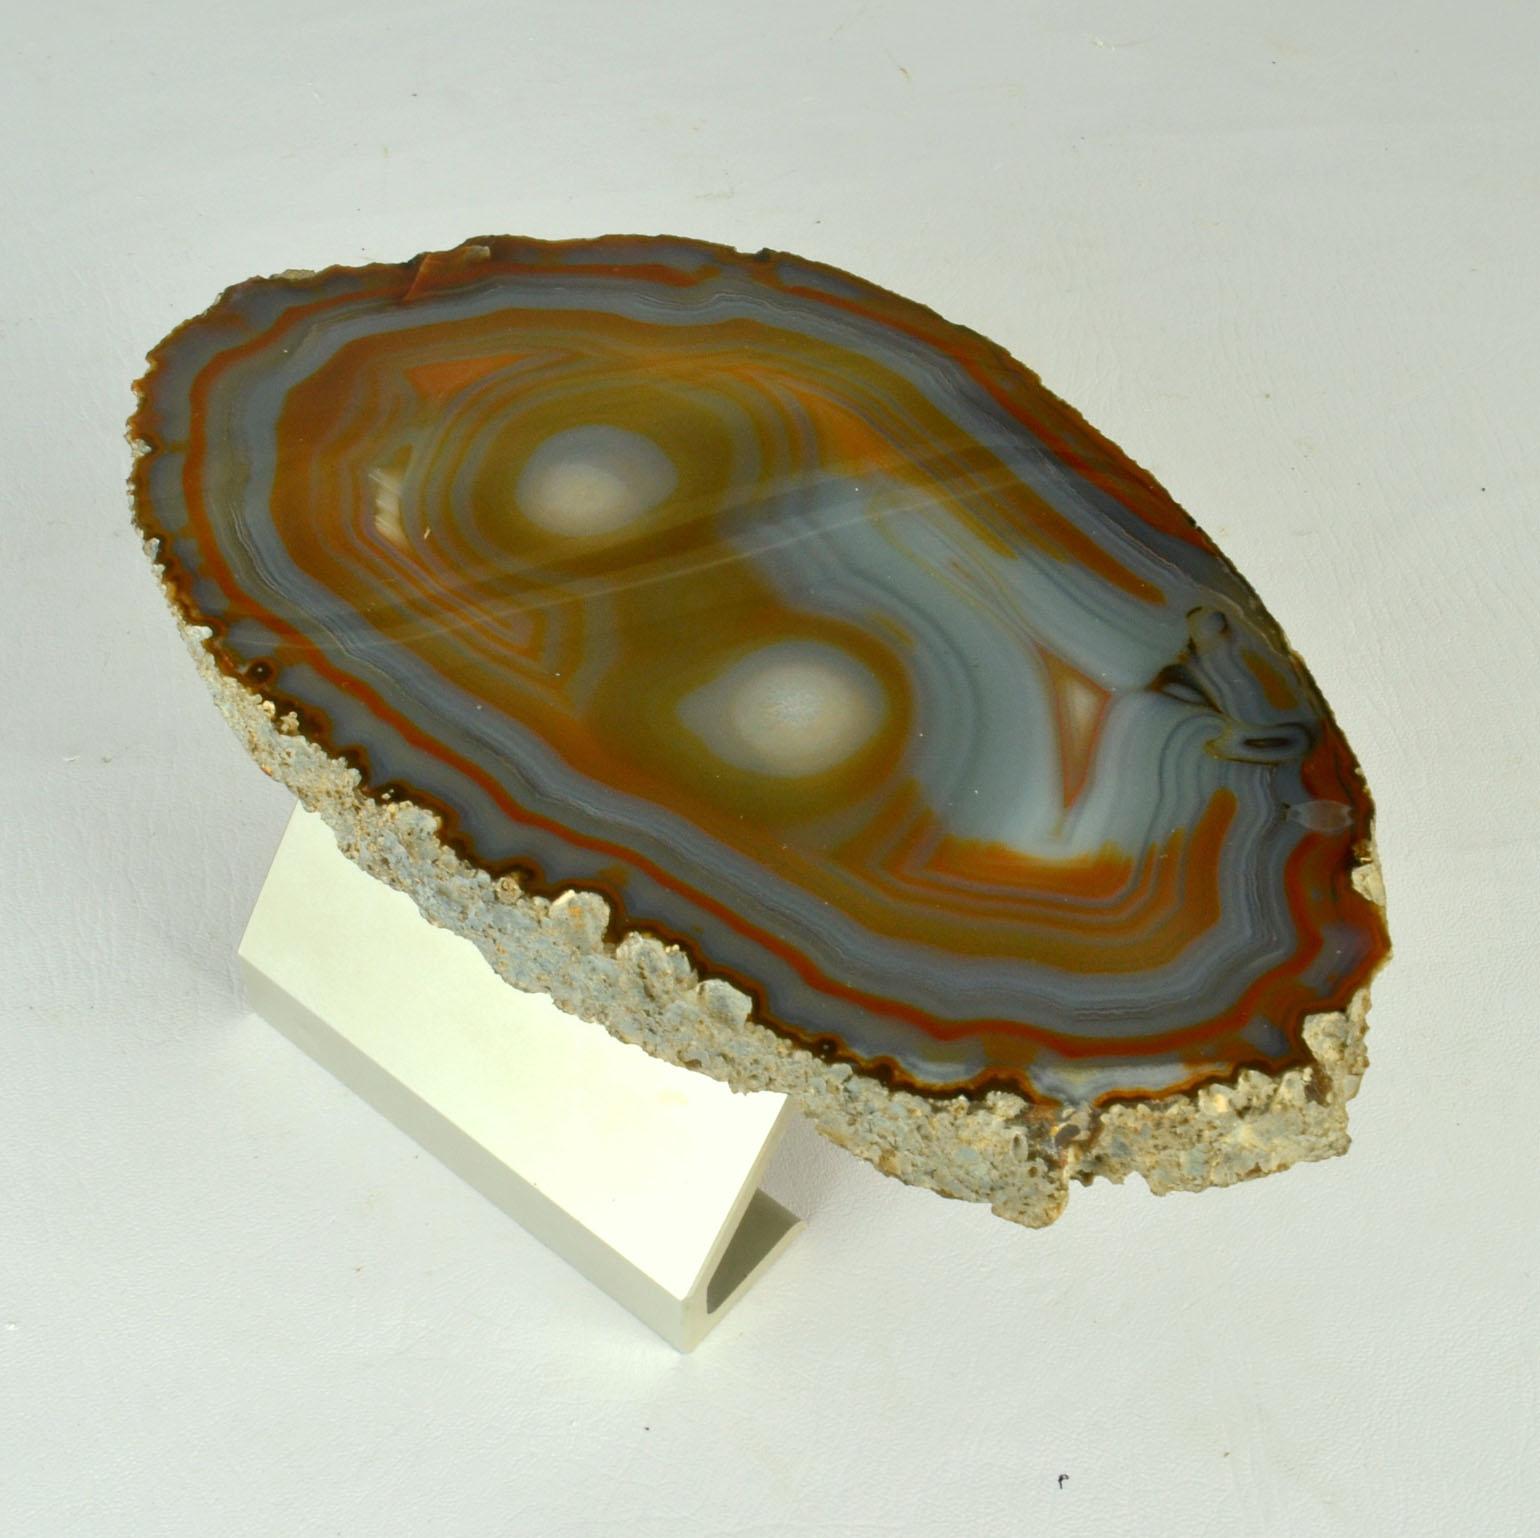 Solid Agate push and pull door handle in an organic pattern in a range of colors from grey's to ocher and from orange greens. The semi precious stone handle is attaches to an aluminum bracket by two fixings and will be fitted to the door with two